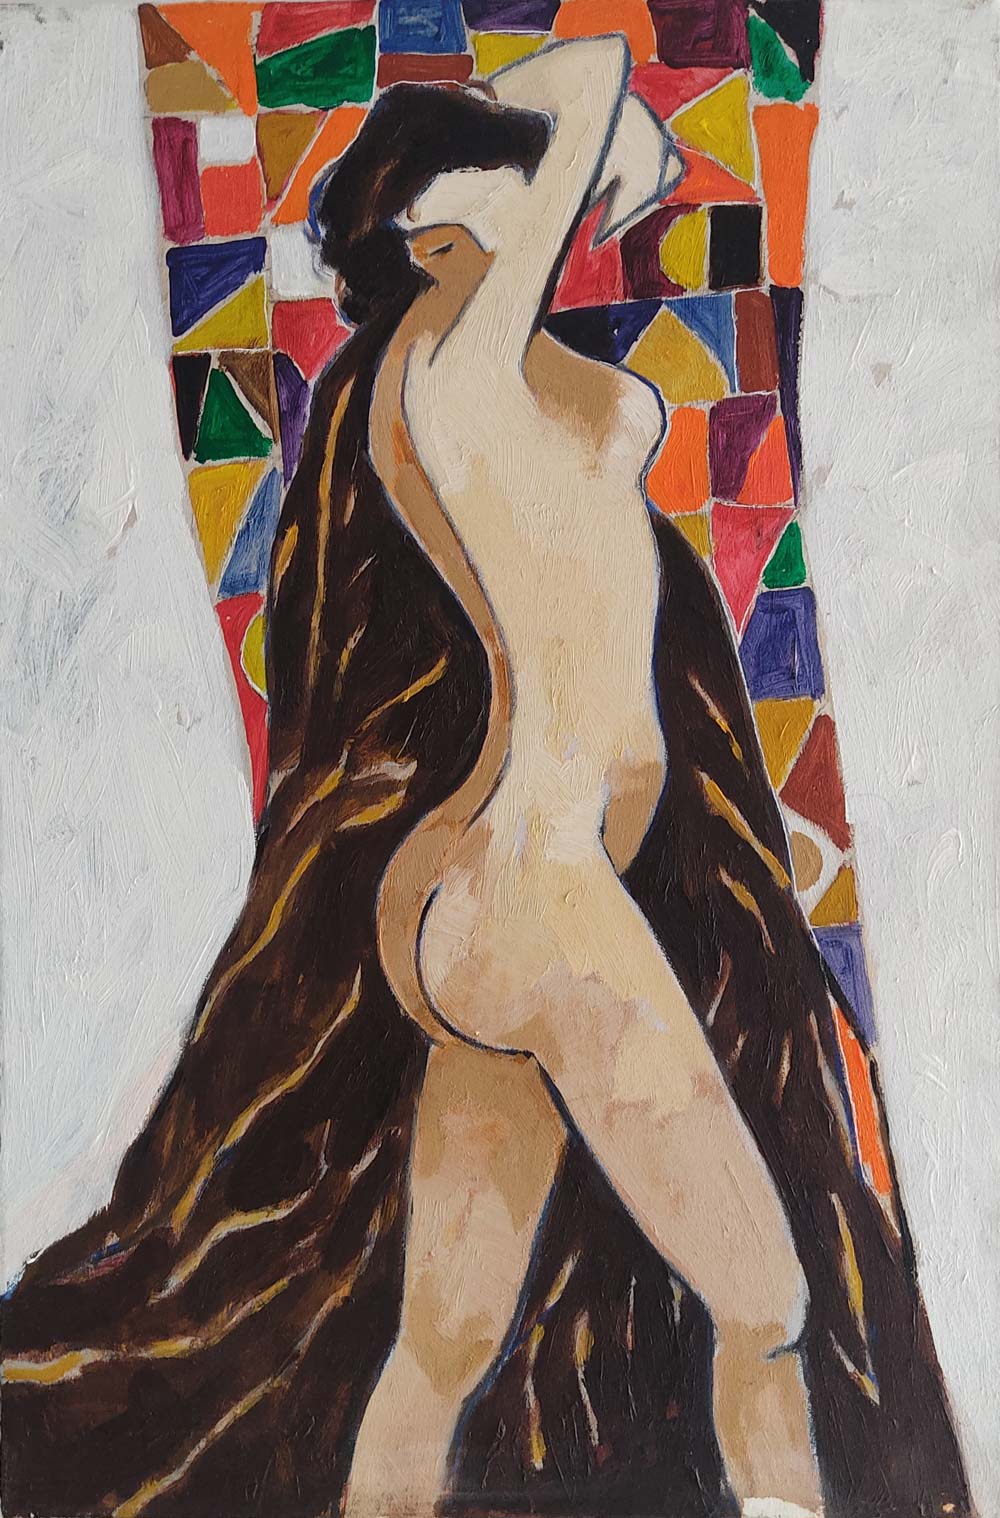 Figurative Painting with Mixed Media on Canvas "Untitled-EP7" art by Sanjiv Sankkpal